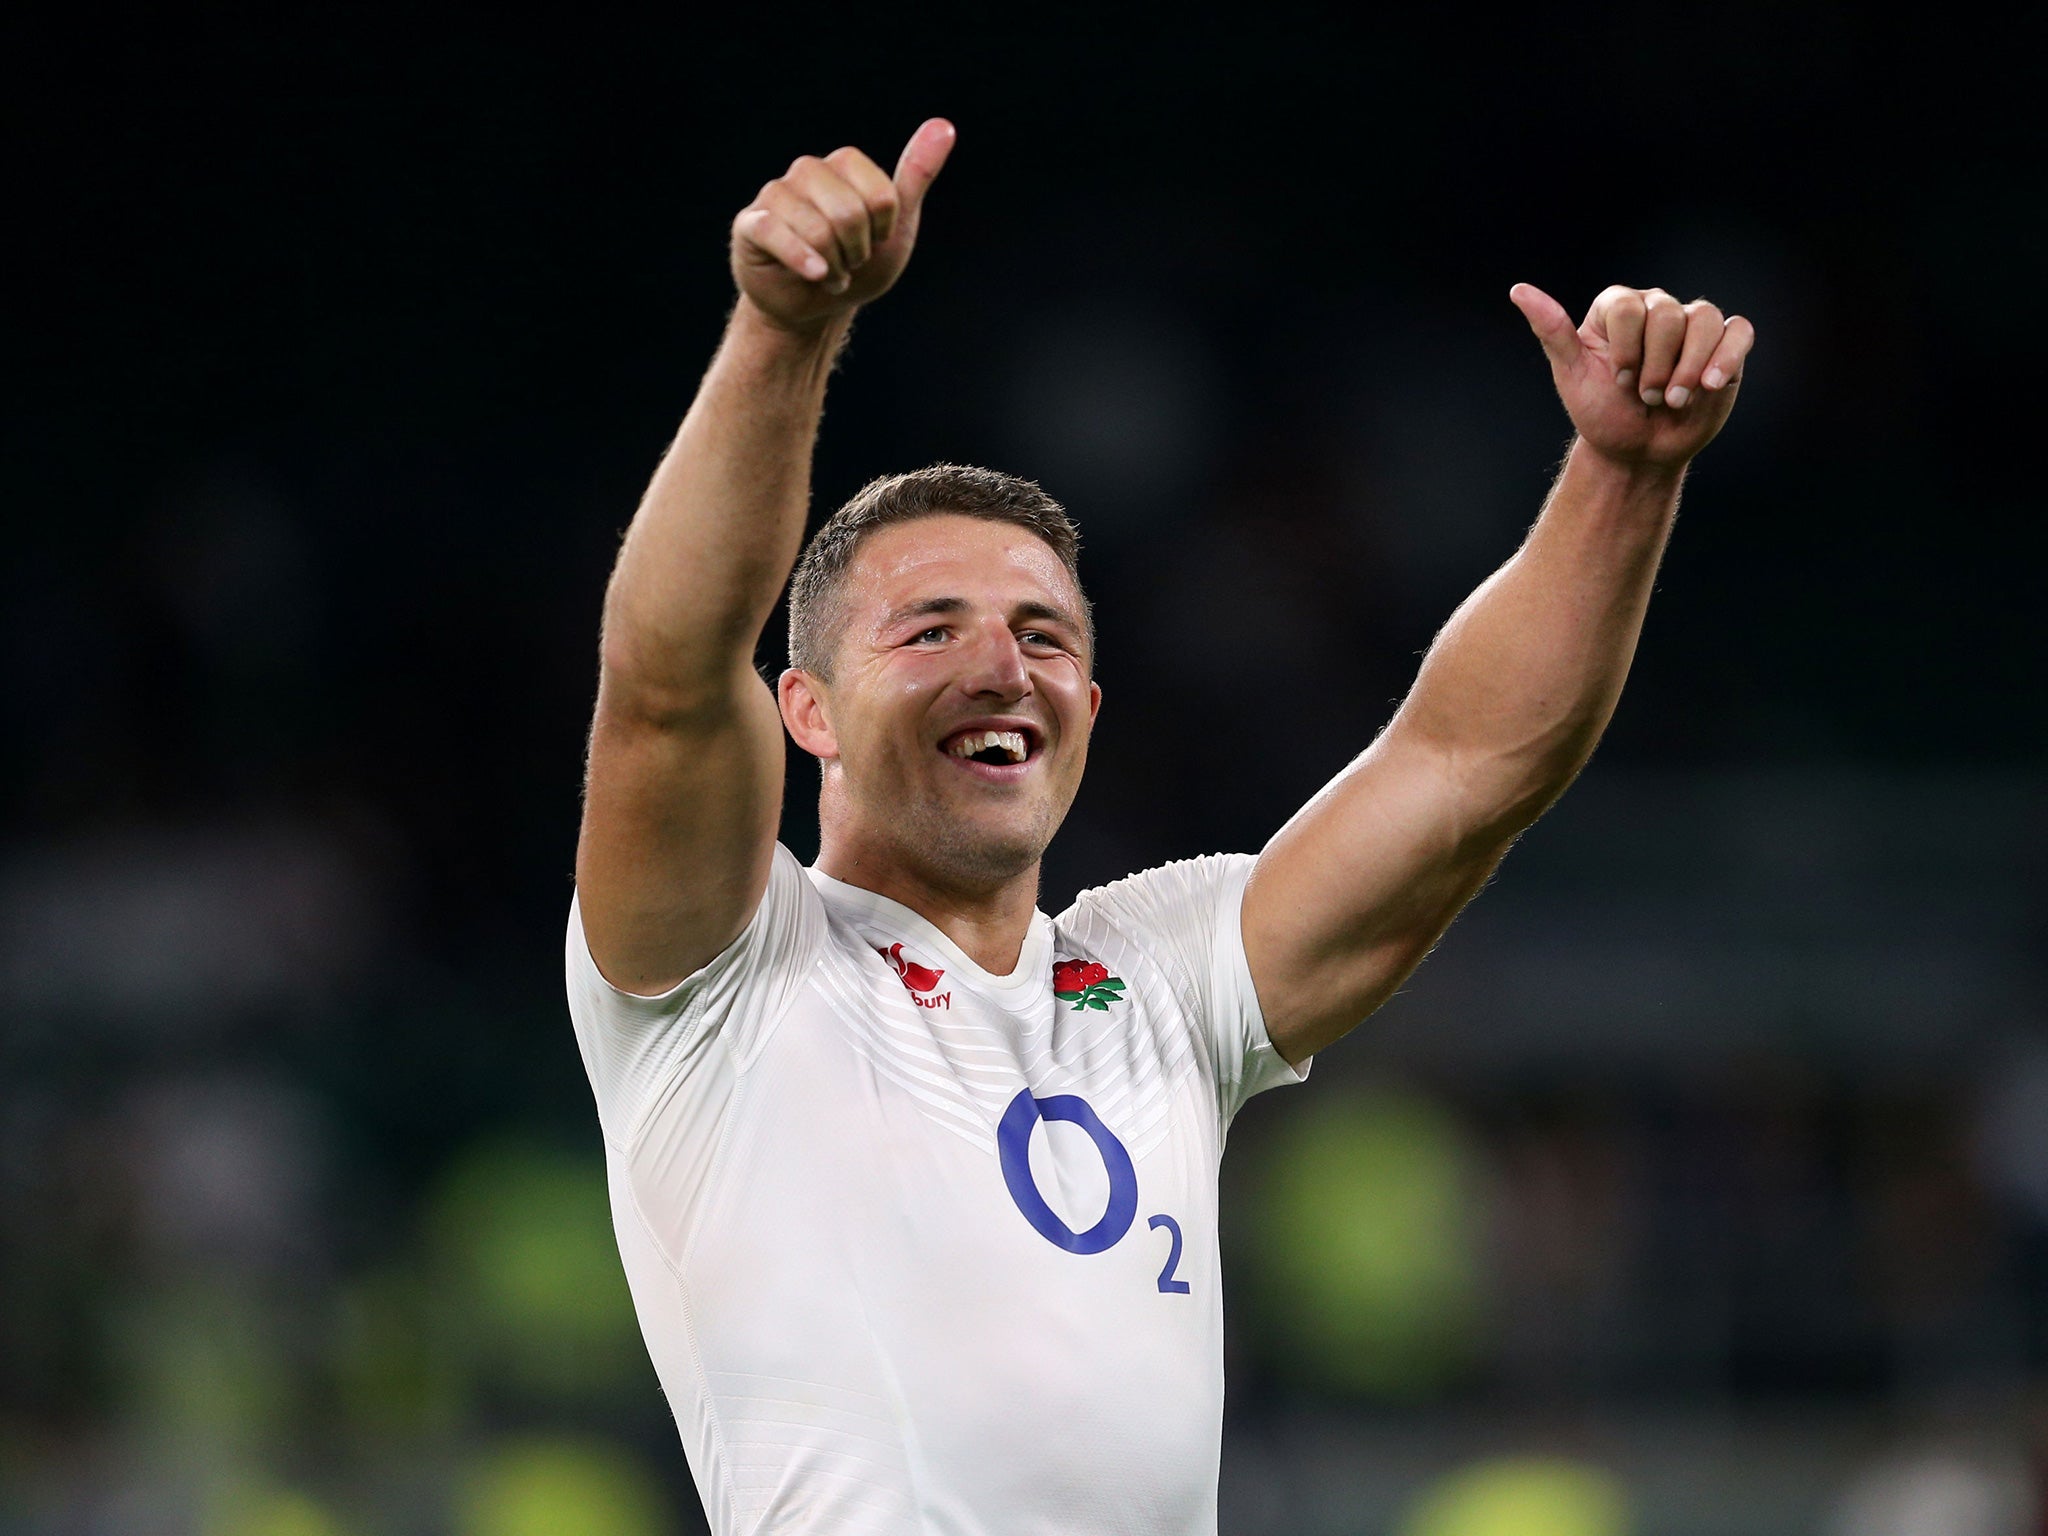 Sam Burgess has been included in England's 31-man squad for the Rugby World Cup